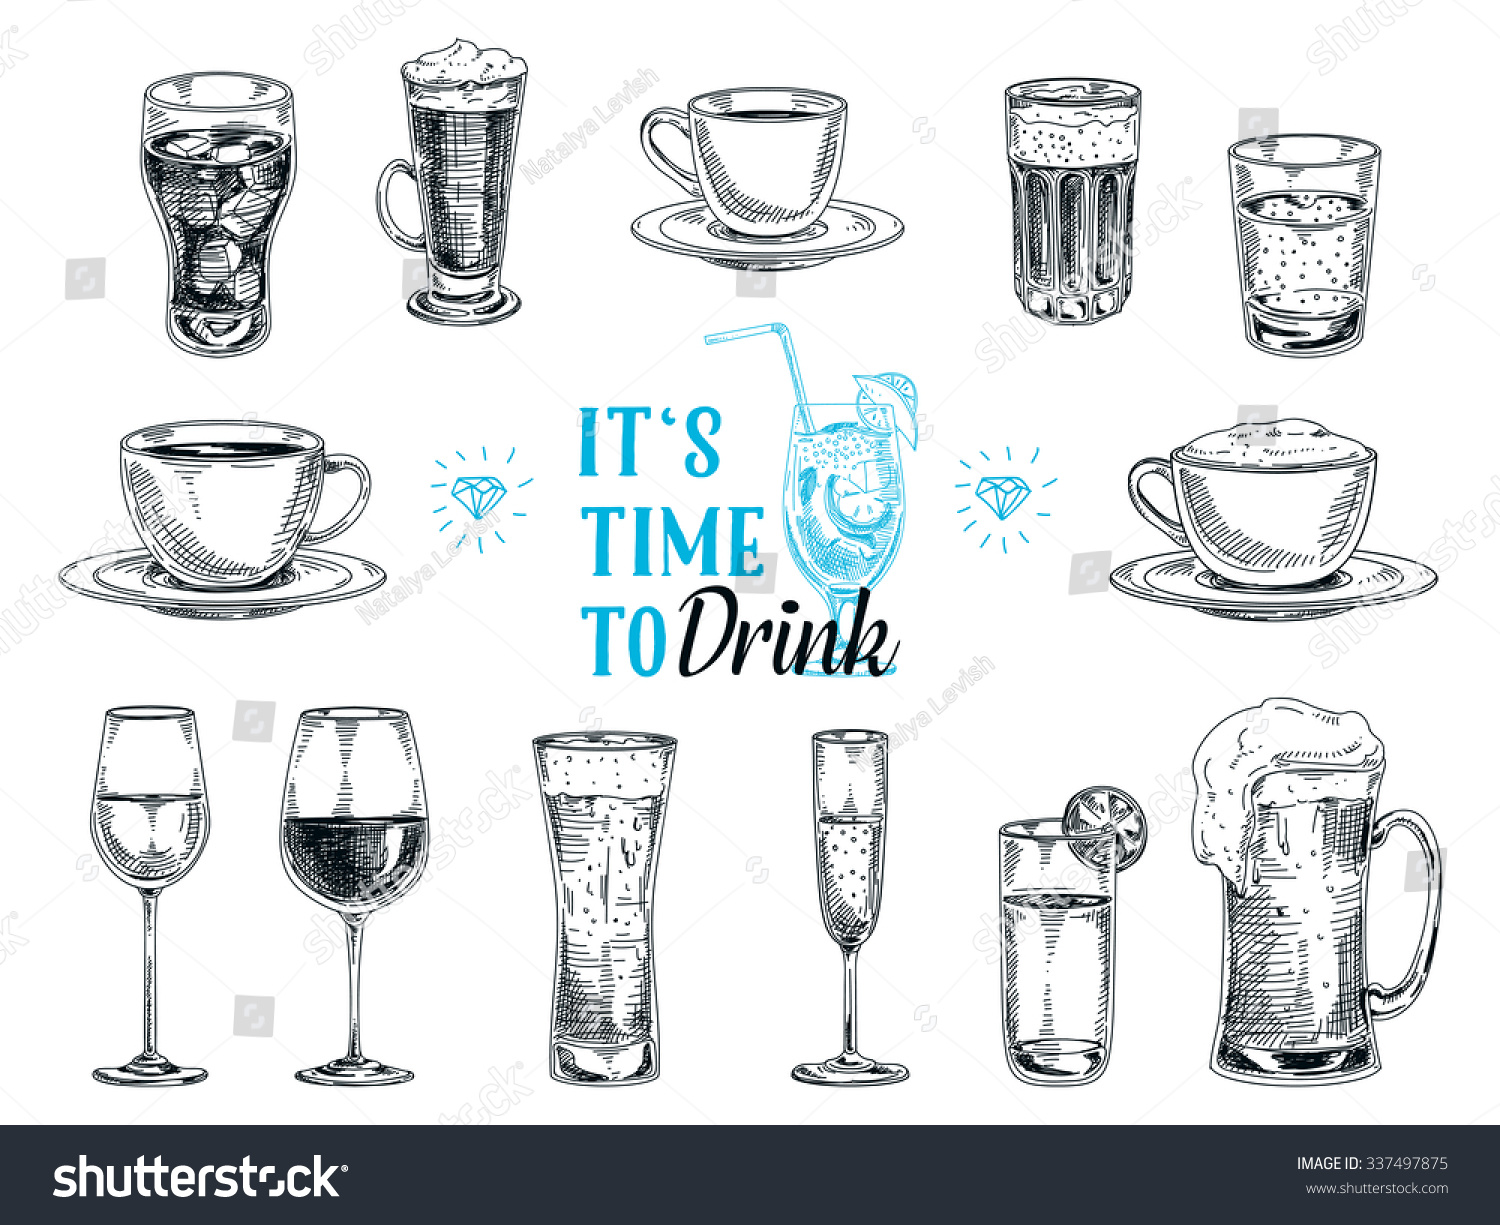 Vector hand drawn illustration with drinks. Sketch. #337497875